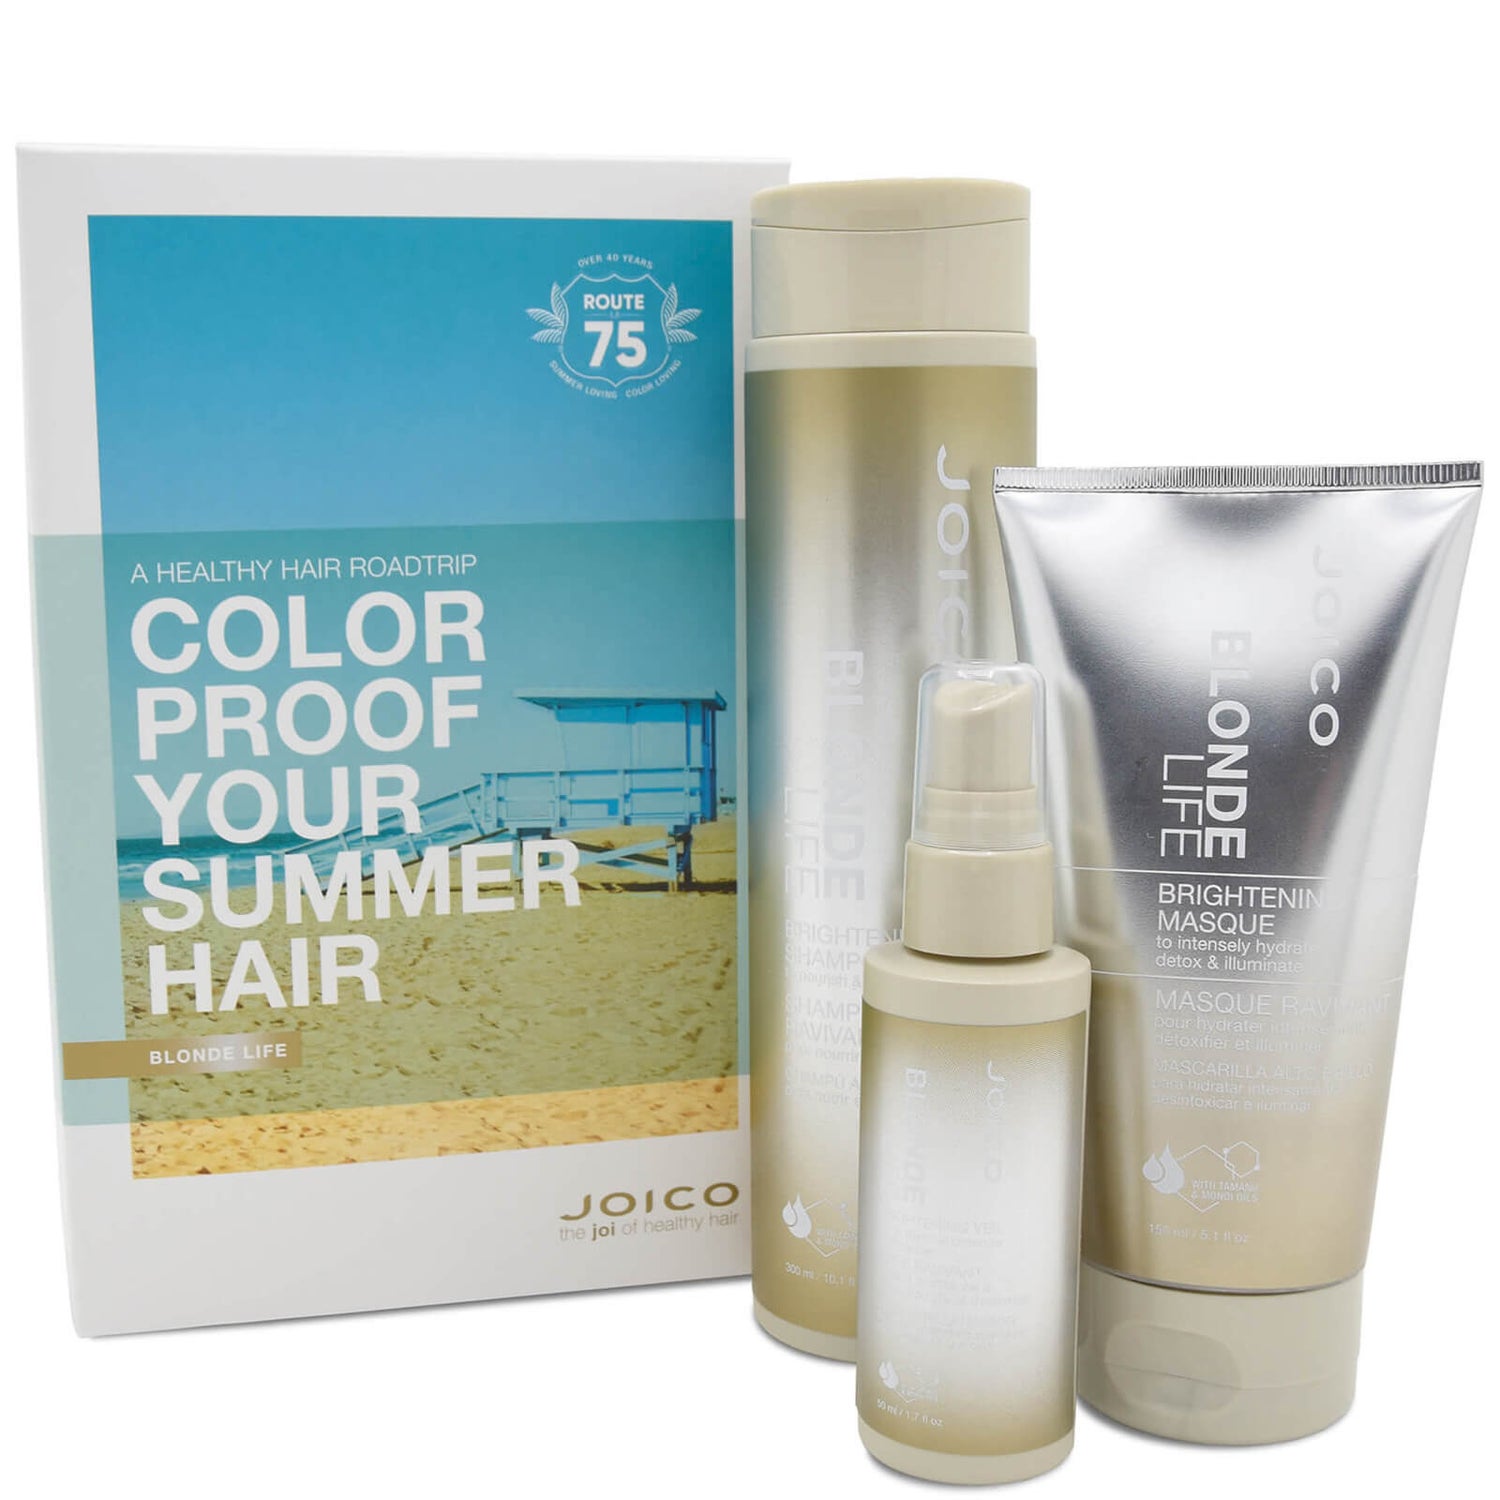 Joico Blonde Life Color Proof Your Summer Hair Trio Pack (Worth £39.85)